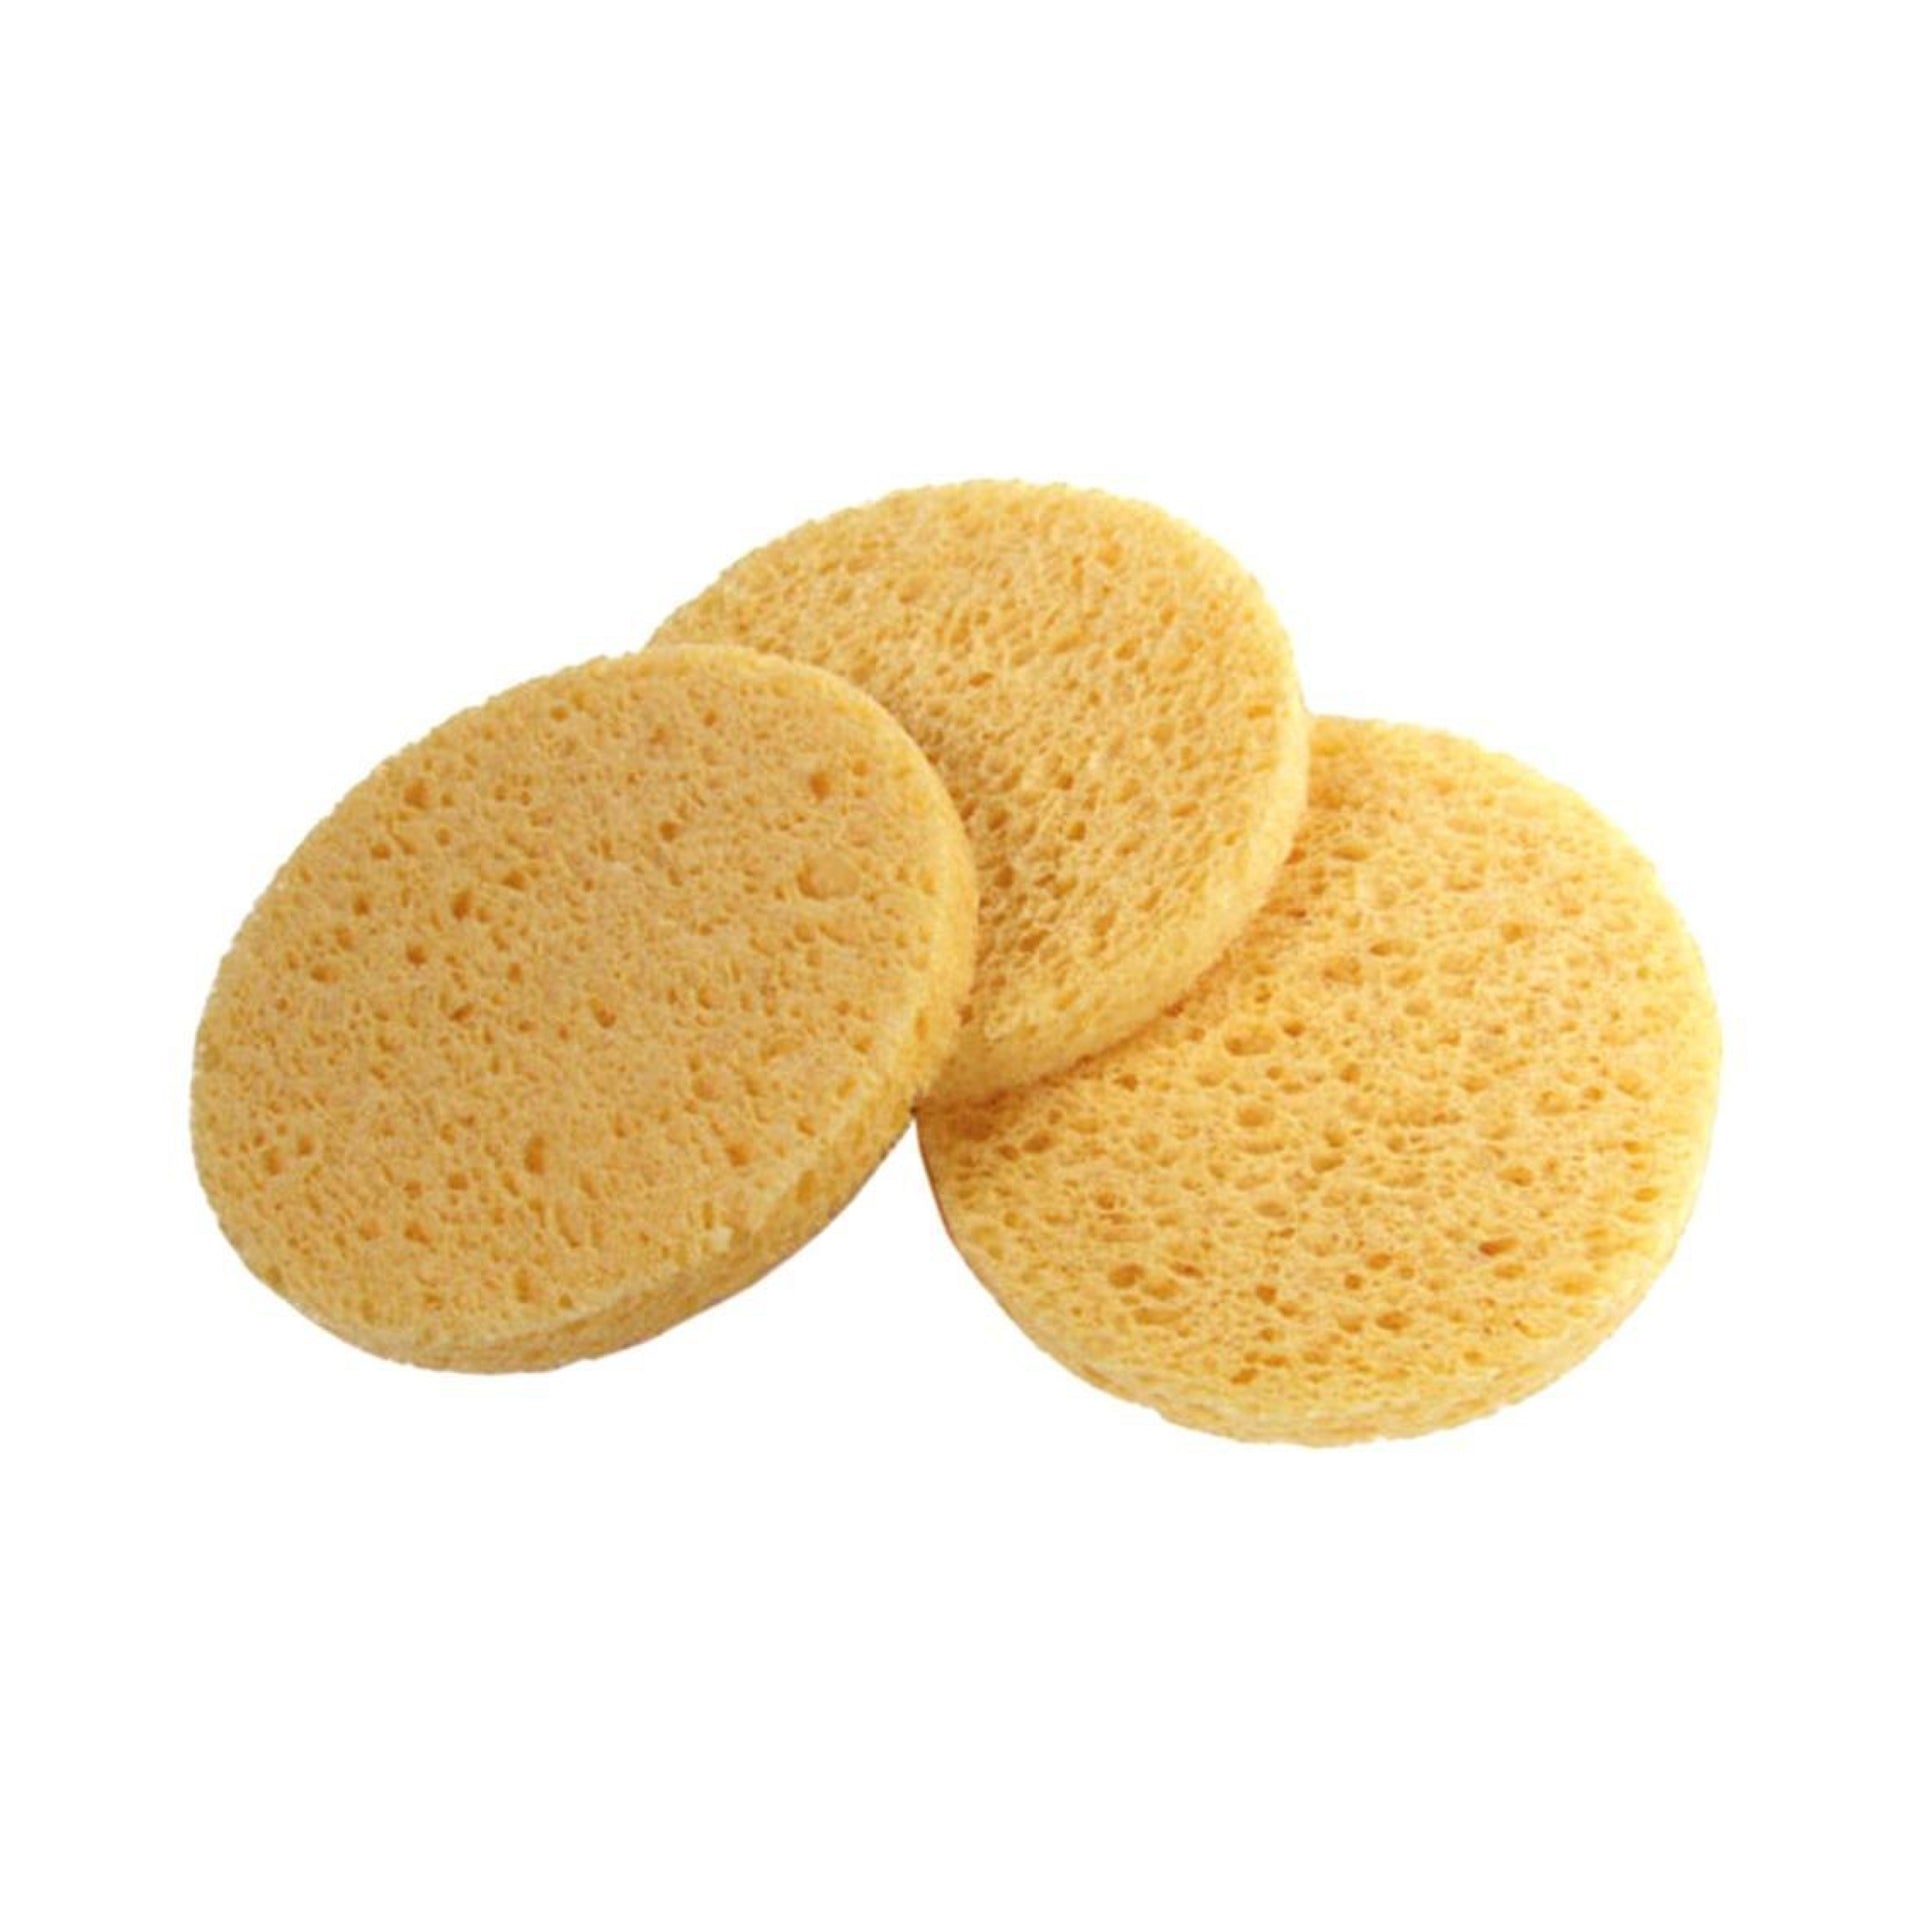 https://beautytriangle.com/cdn/shop/products/0000645_cellulose-facial-sponge-pack-of-2.jpg?v=1668679092&width=1920